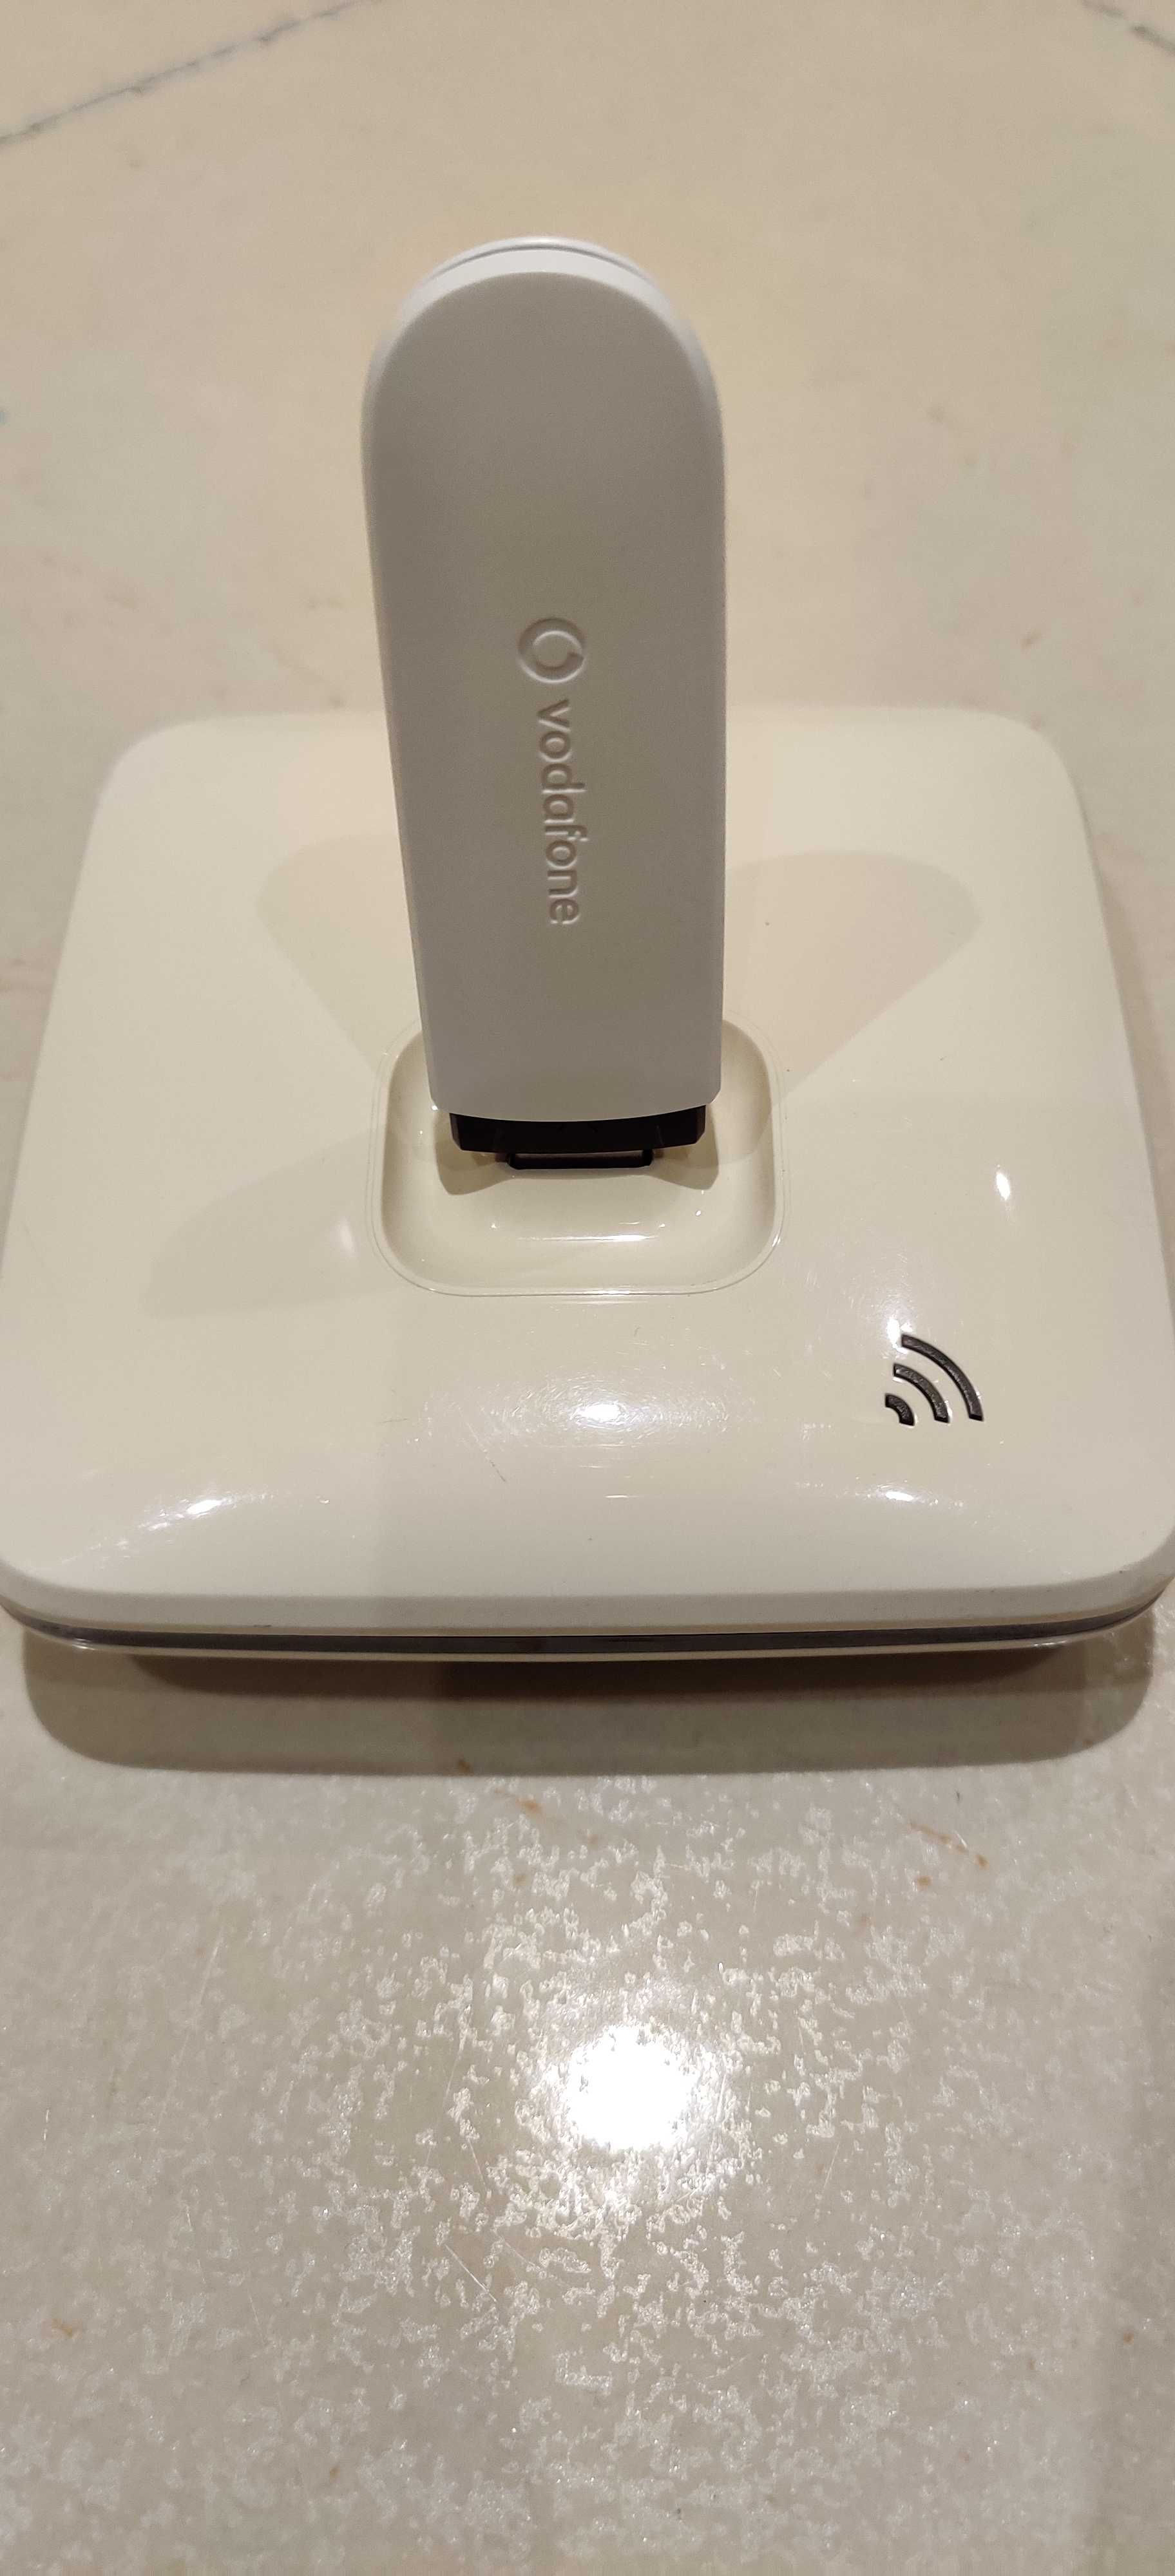 Router 3G VODAFONE Wifi Ethernet